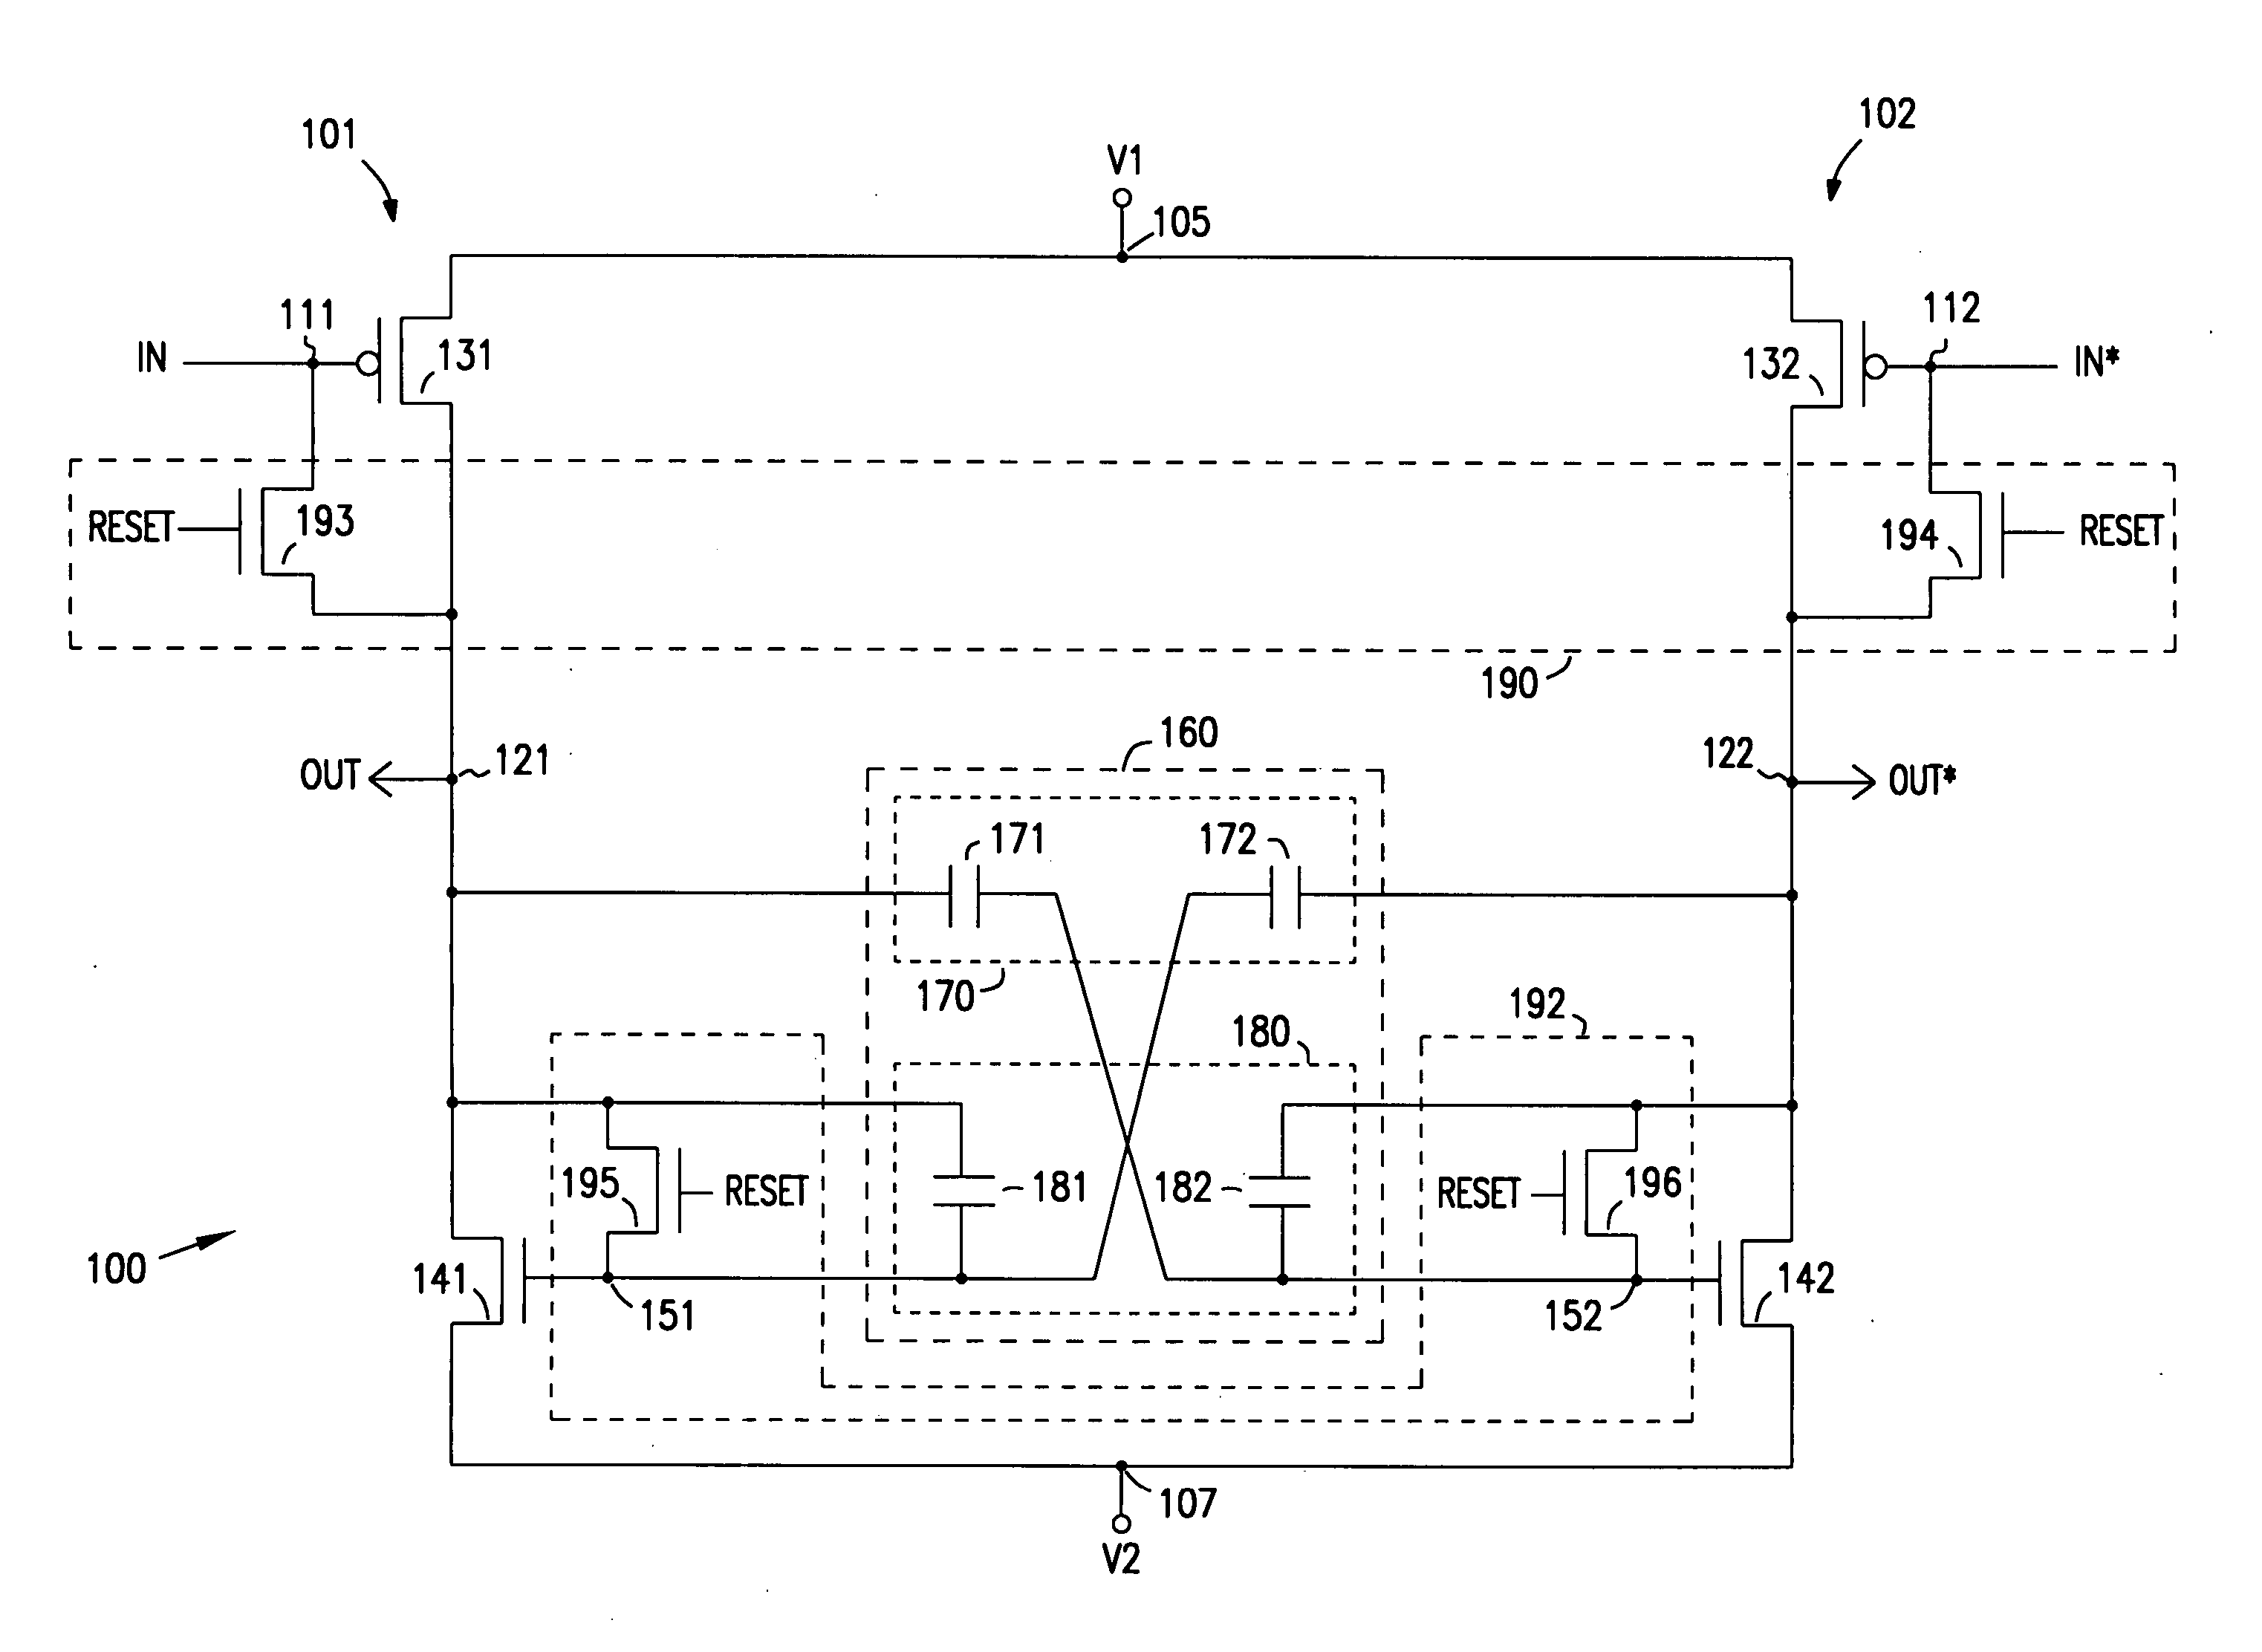 Capacitively-coupled level restore circuits for low voltage swing logic circuits